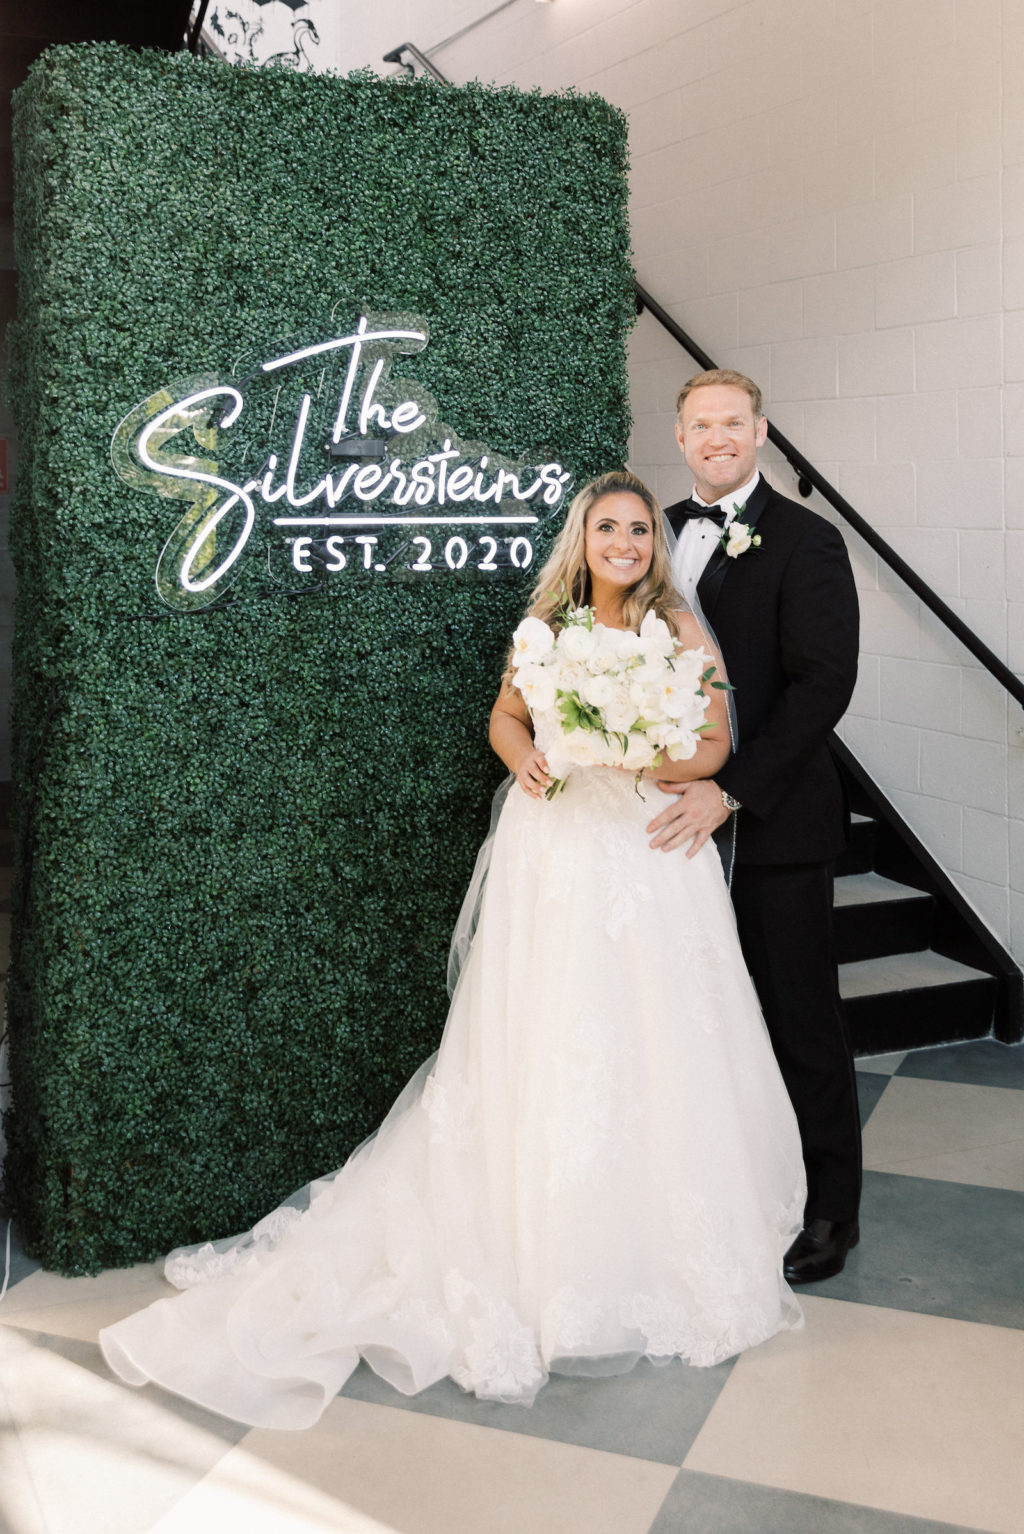 Classic Bride Holding White Floral Bouquet and Groom in Front of Greenery Hedge Panel Wall with Acrylic Neon Personalized Name Sign